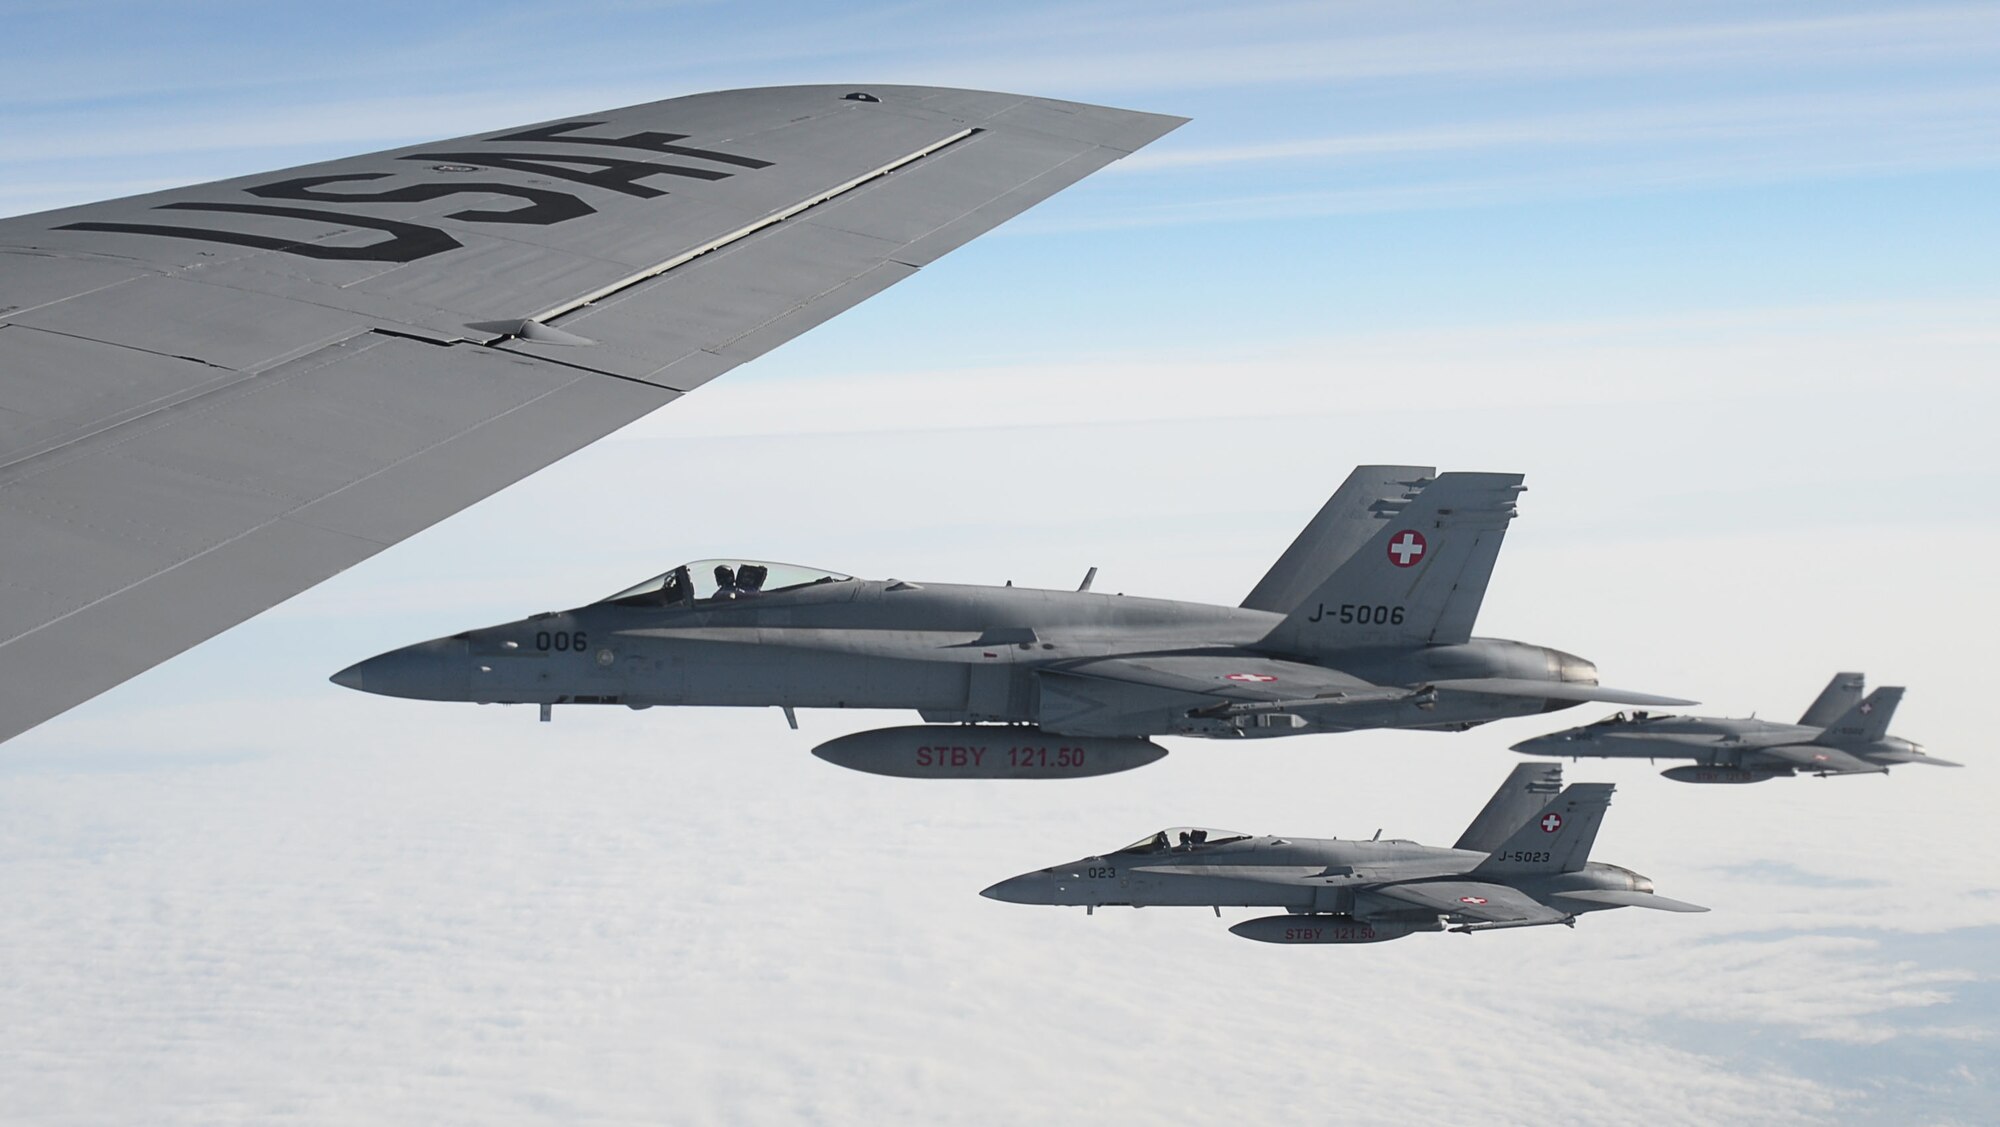 Three Swiss air force F-18 Hornets fly alongside a U.S. Air Force KC-135 Stratotanker, assigned to the 100th Air Refueling Wing RAF Mildenhall, England, after aerial refueling, Oct. 20, 2017. Four F-18s received fuel during a training mission over Germany. (U.S. Air Force photo by Senior Airman Justine Rho)